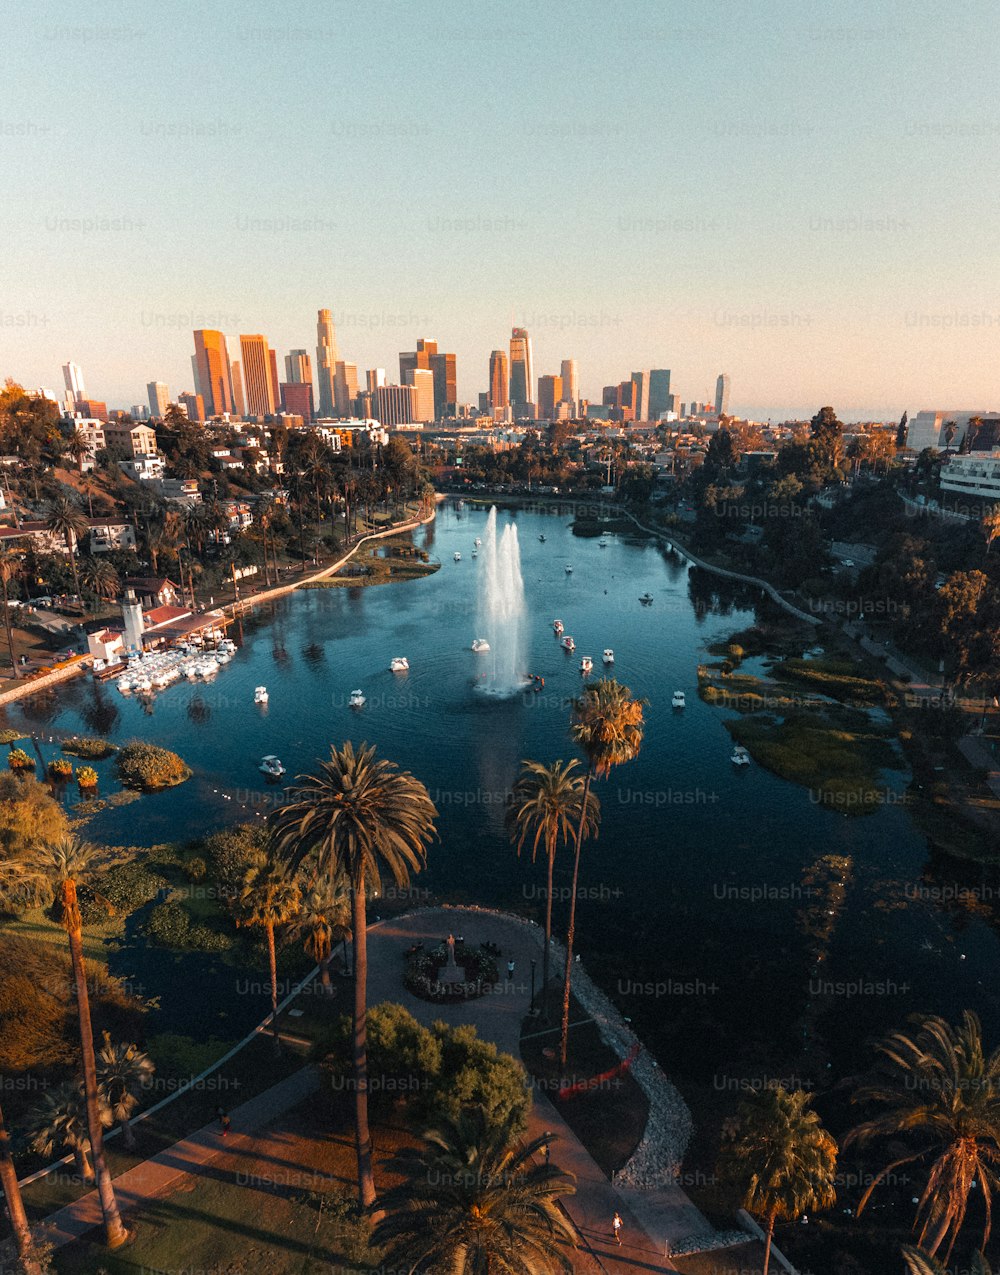 A vertical shot of a lake surrounded by skyscrapers under the sunlight in Los Angeles, California